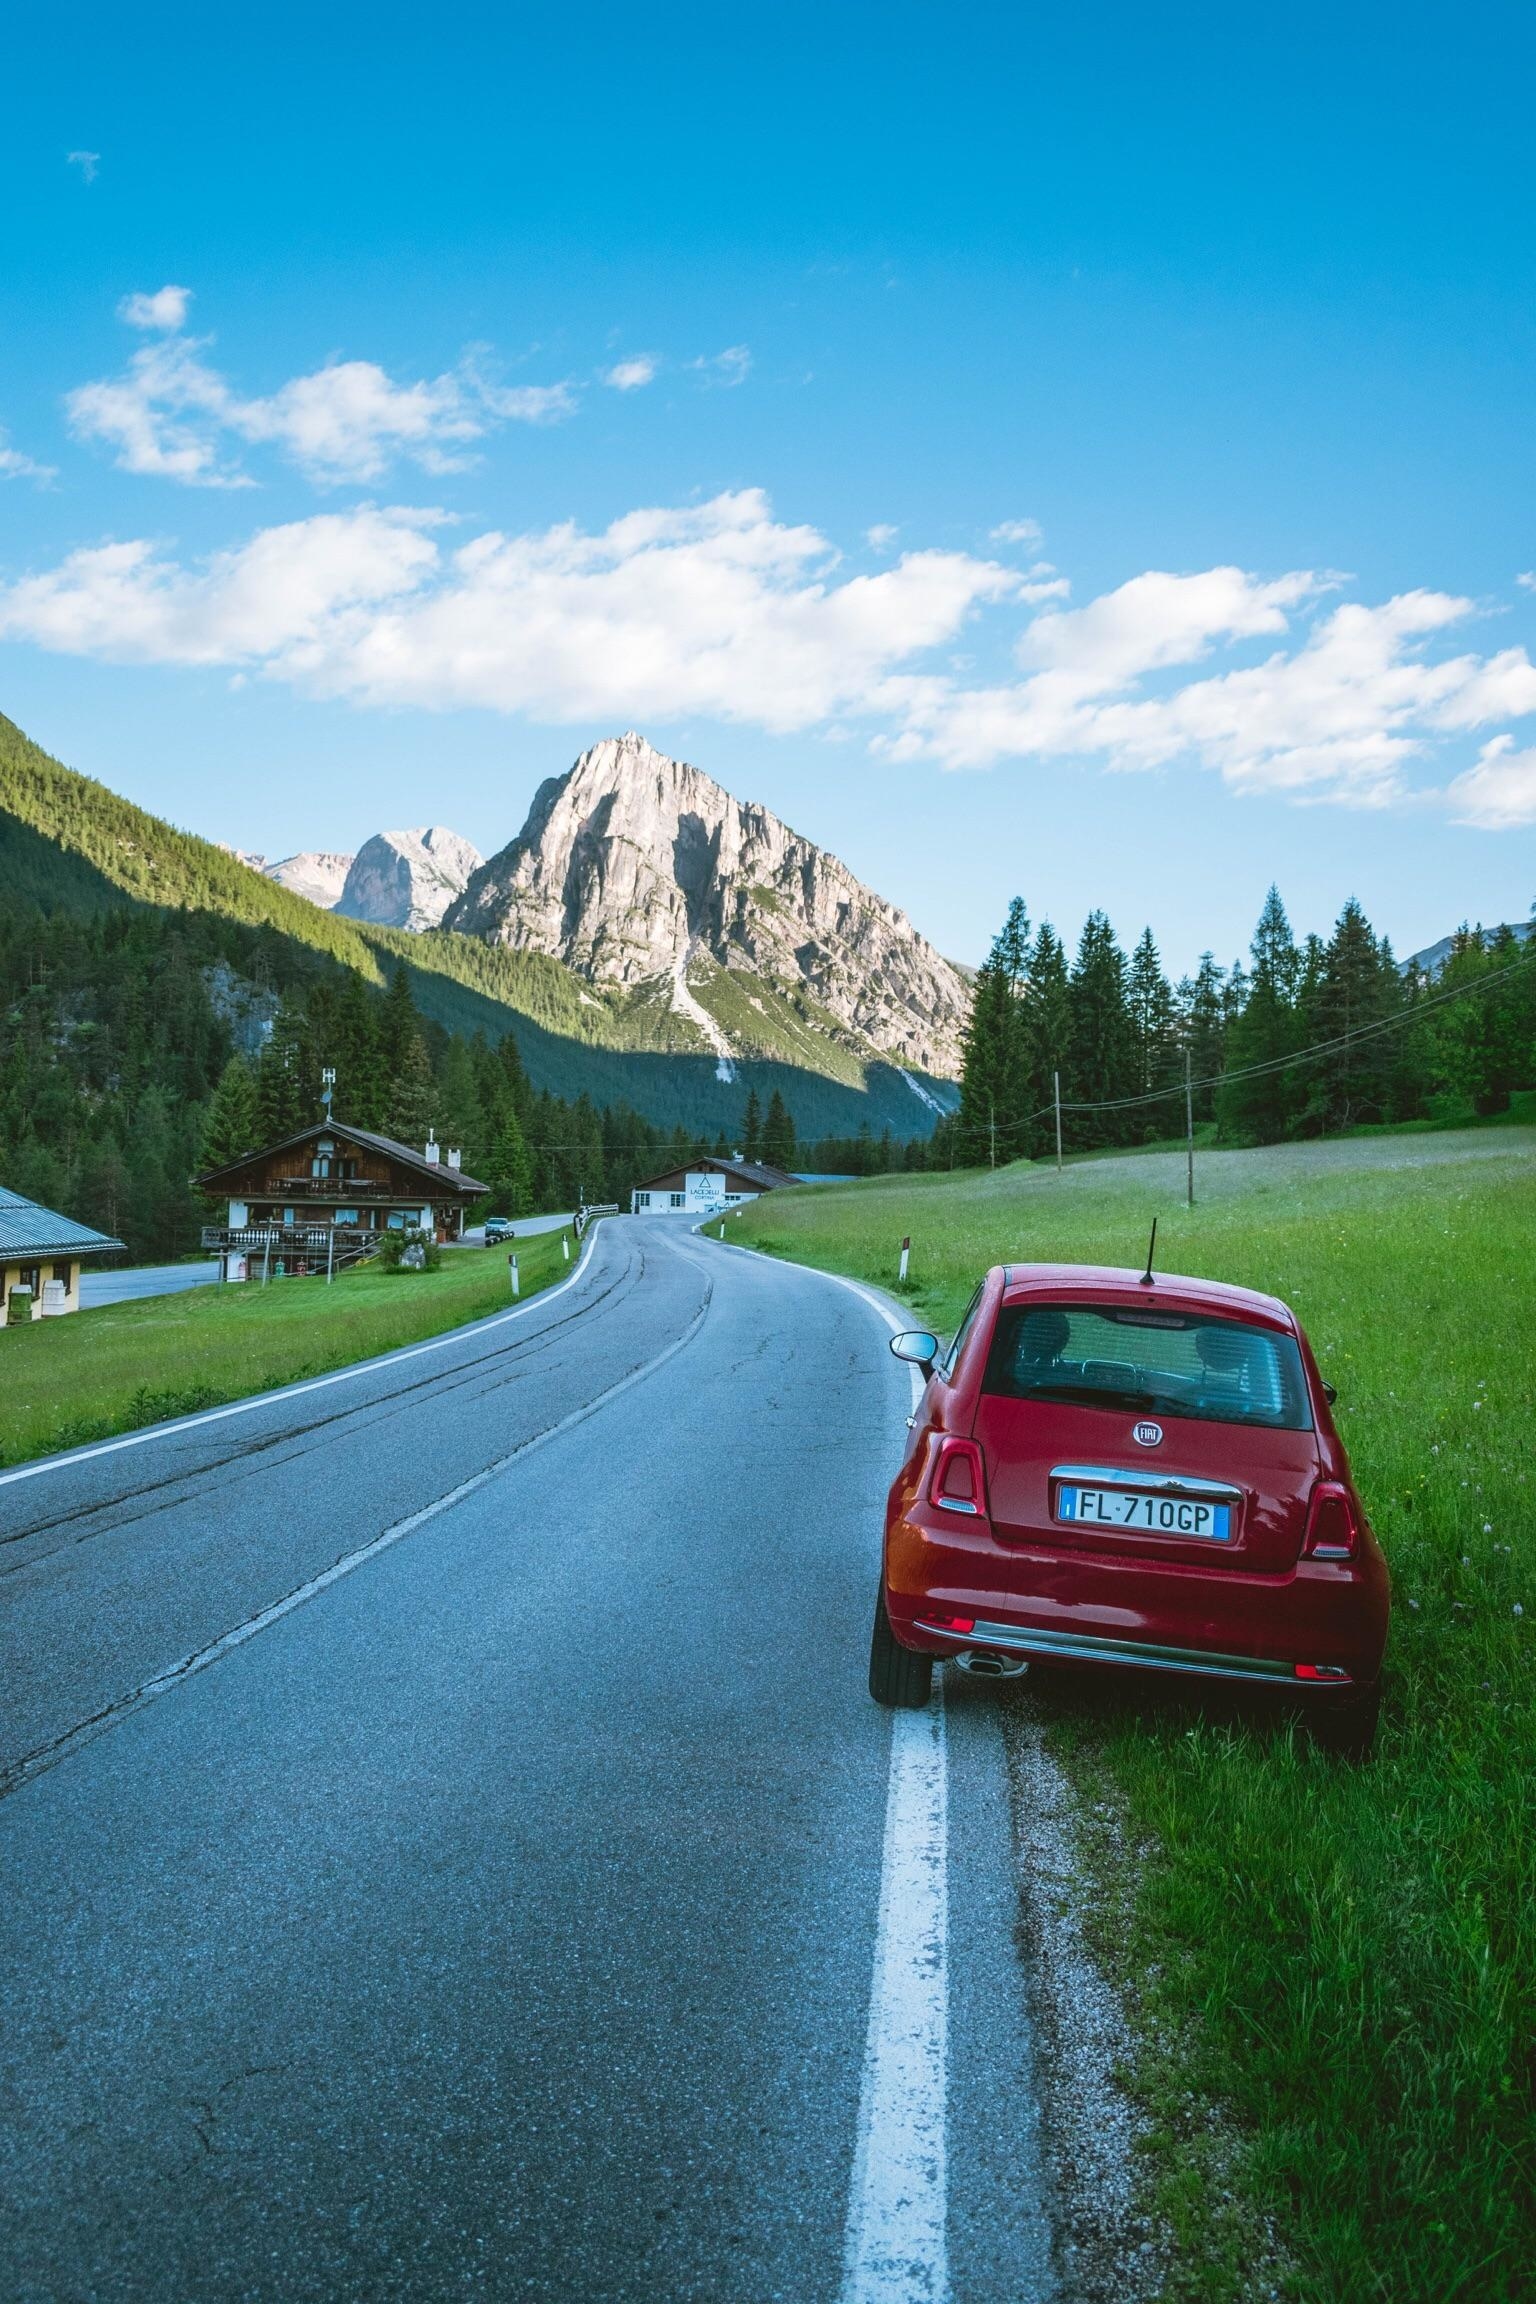 The Dolomite Mountains at the end of a winding road with a red Fiat 500 parked on the side